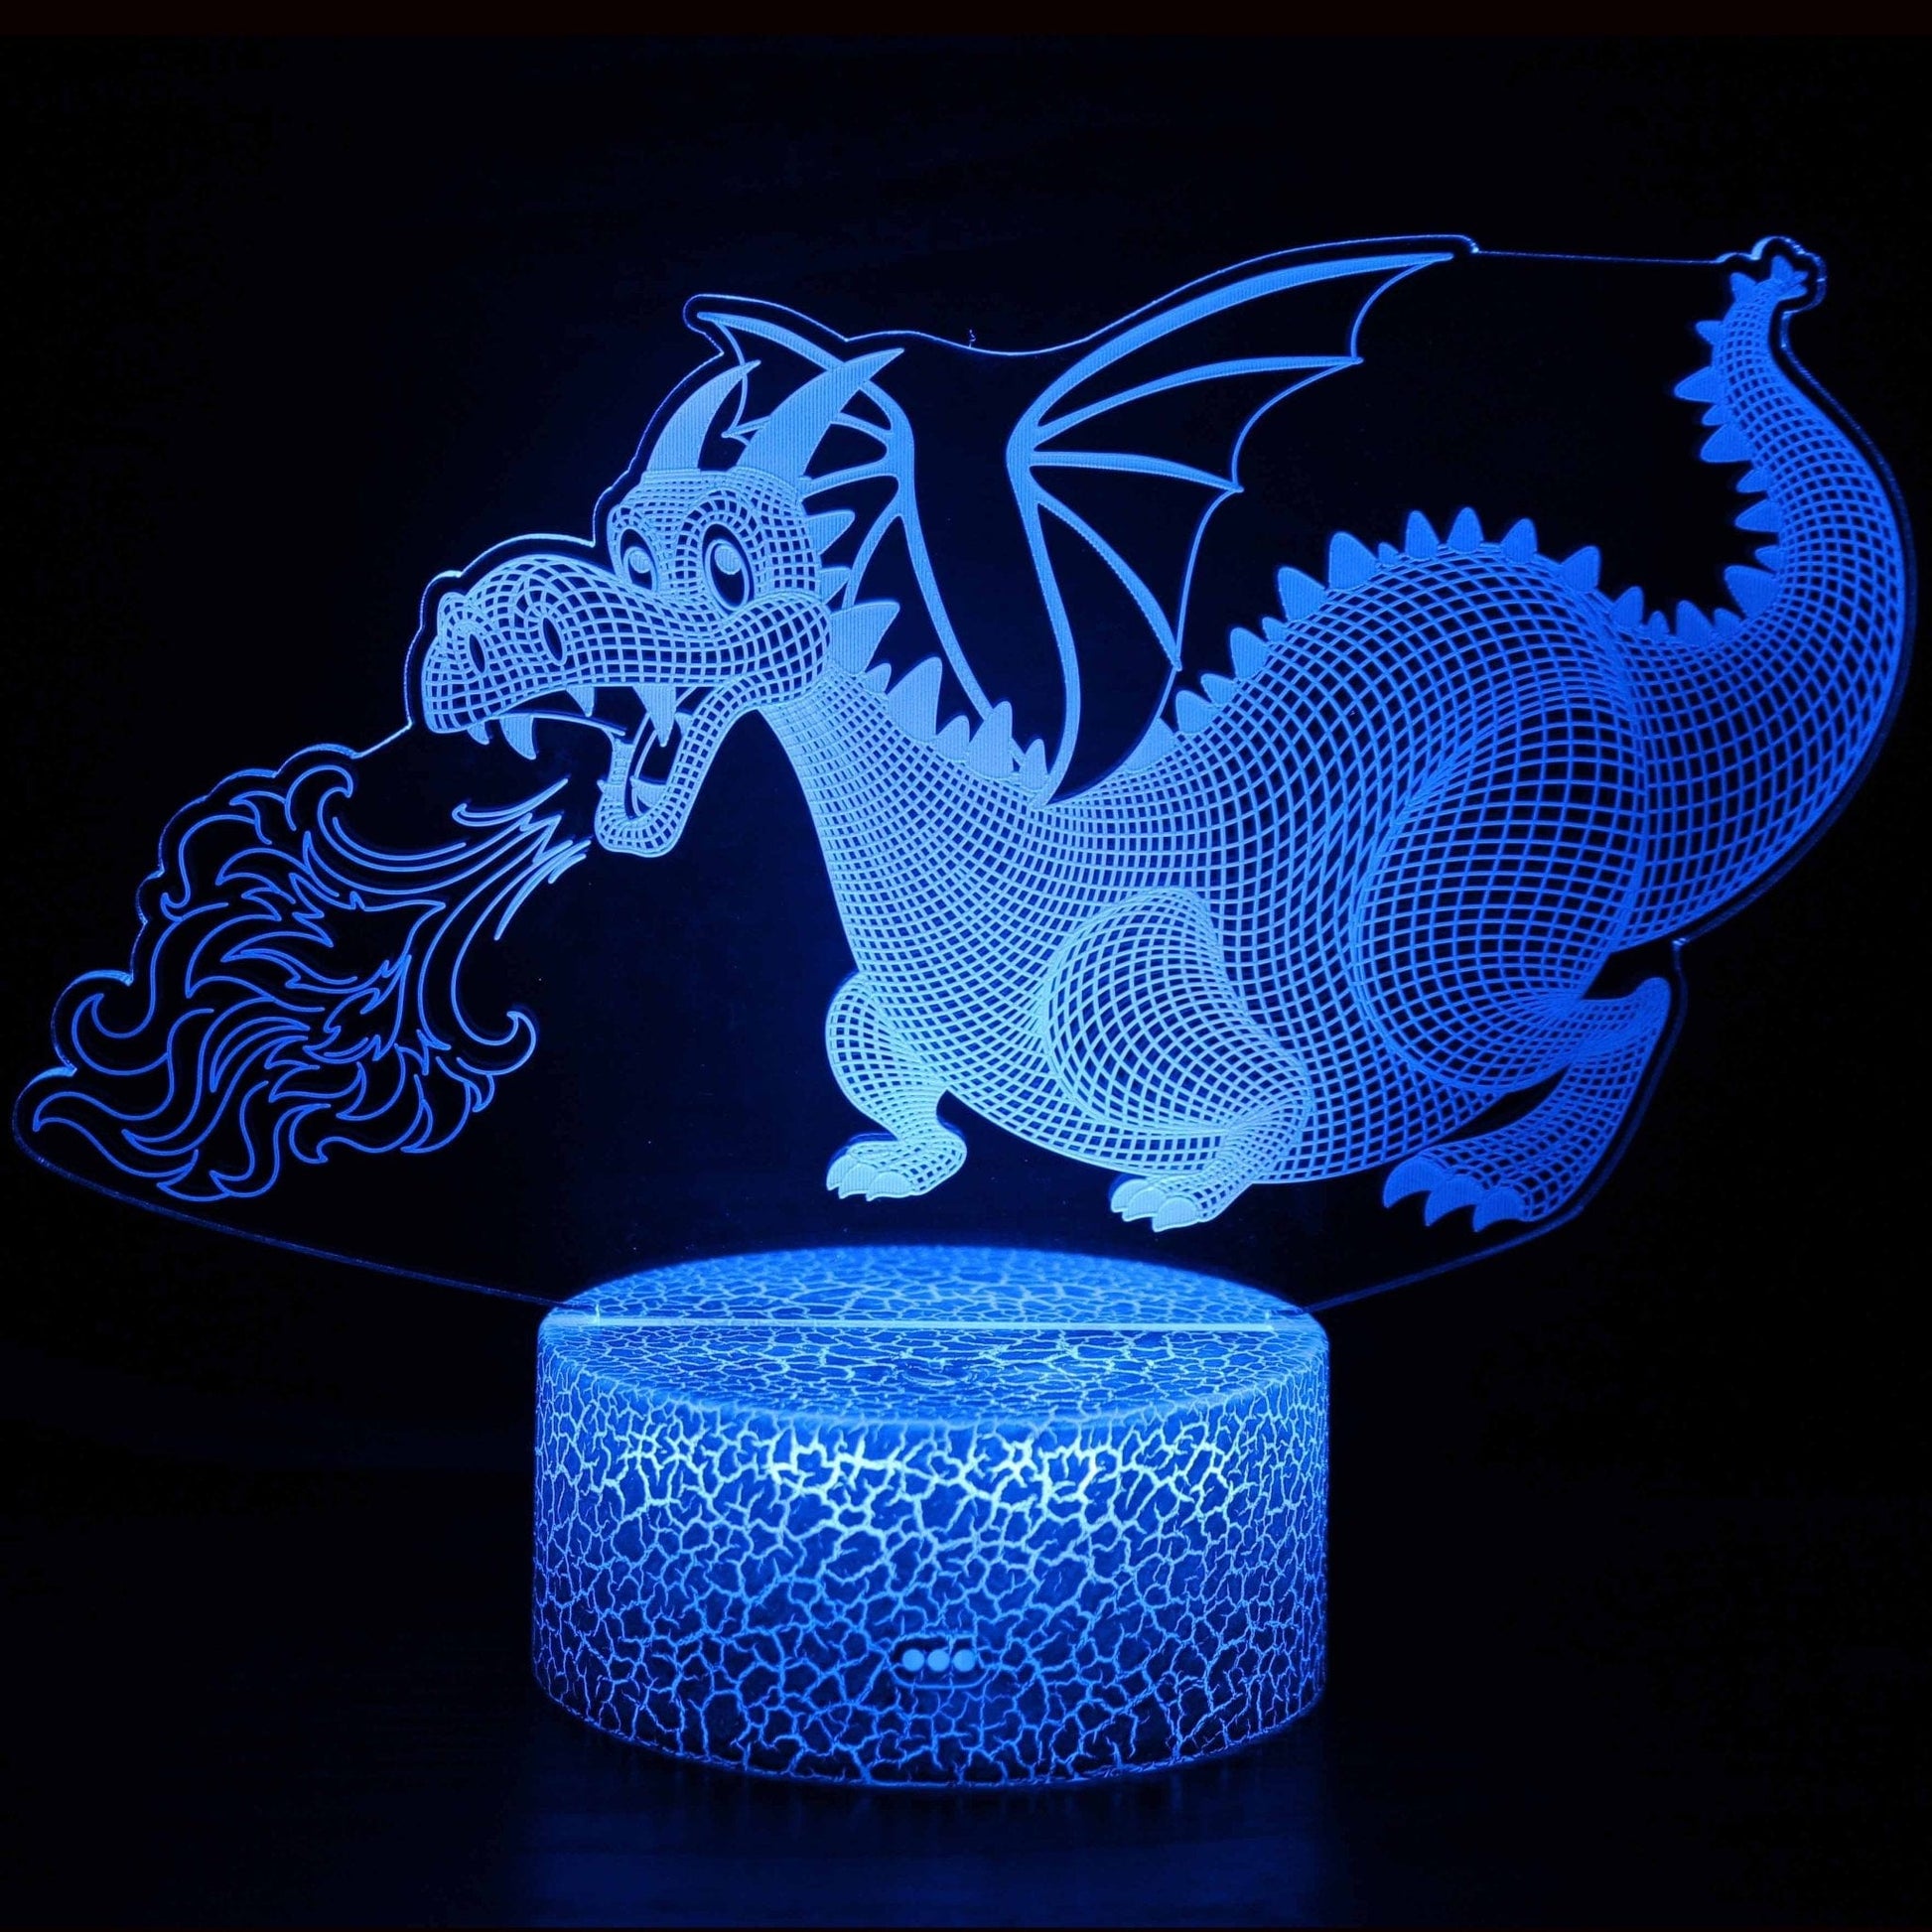 Dinosaur Series 3D Table Lamp LED Colorful Touch Remote Control Gift Nightlight - CLASSY CLOSET BOUTIQUEDinosaur Series 3D Table Lamp LED Colorful Touch Remote Control Gift Nightlighteperlo43C8598B0C6C4F75A1FB23B55B48263CKX-24437 Colors No Remote